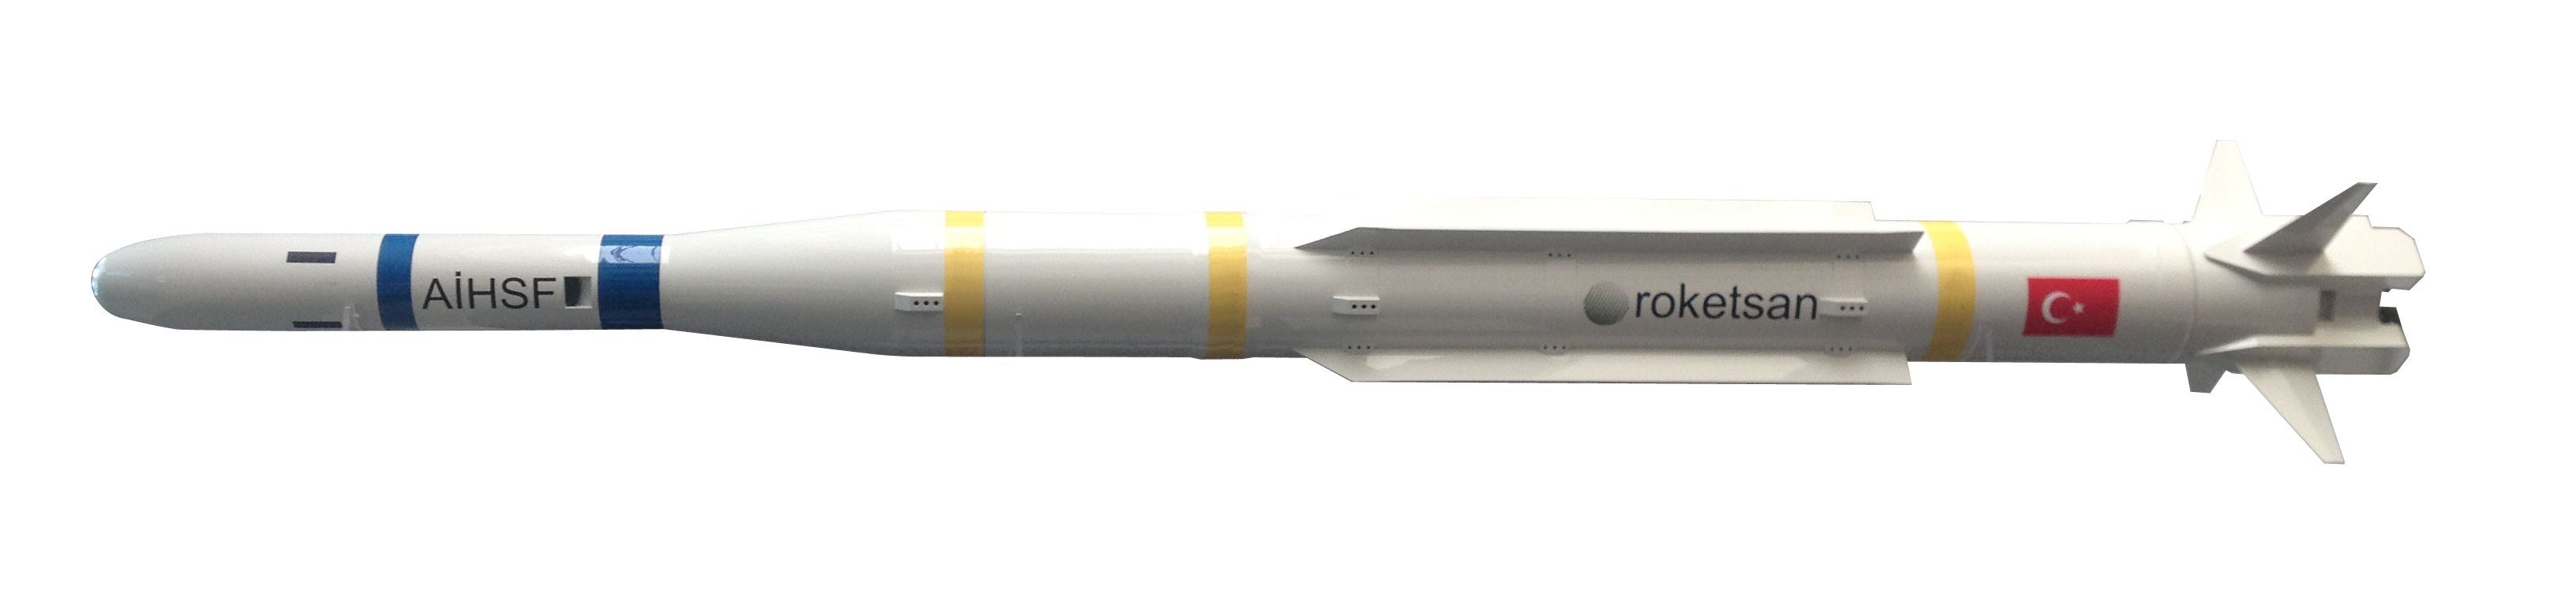 Missile PNG Pic